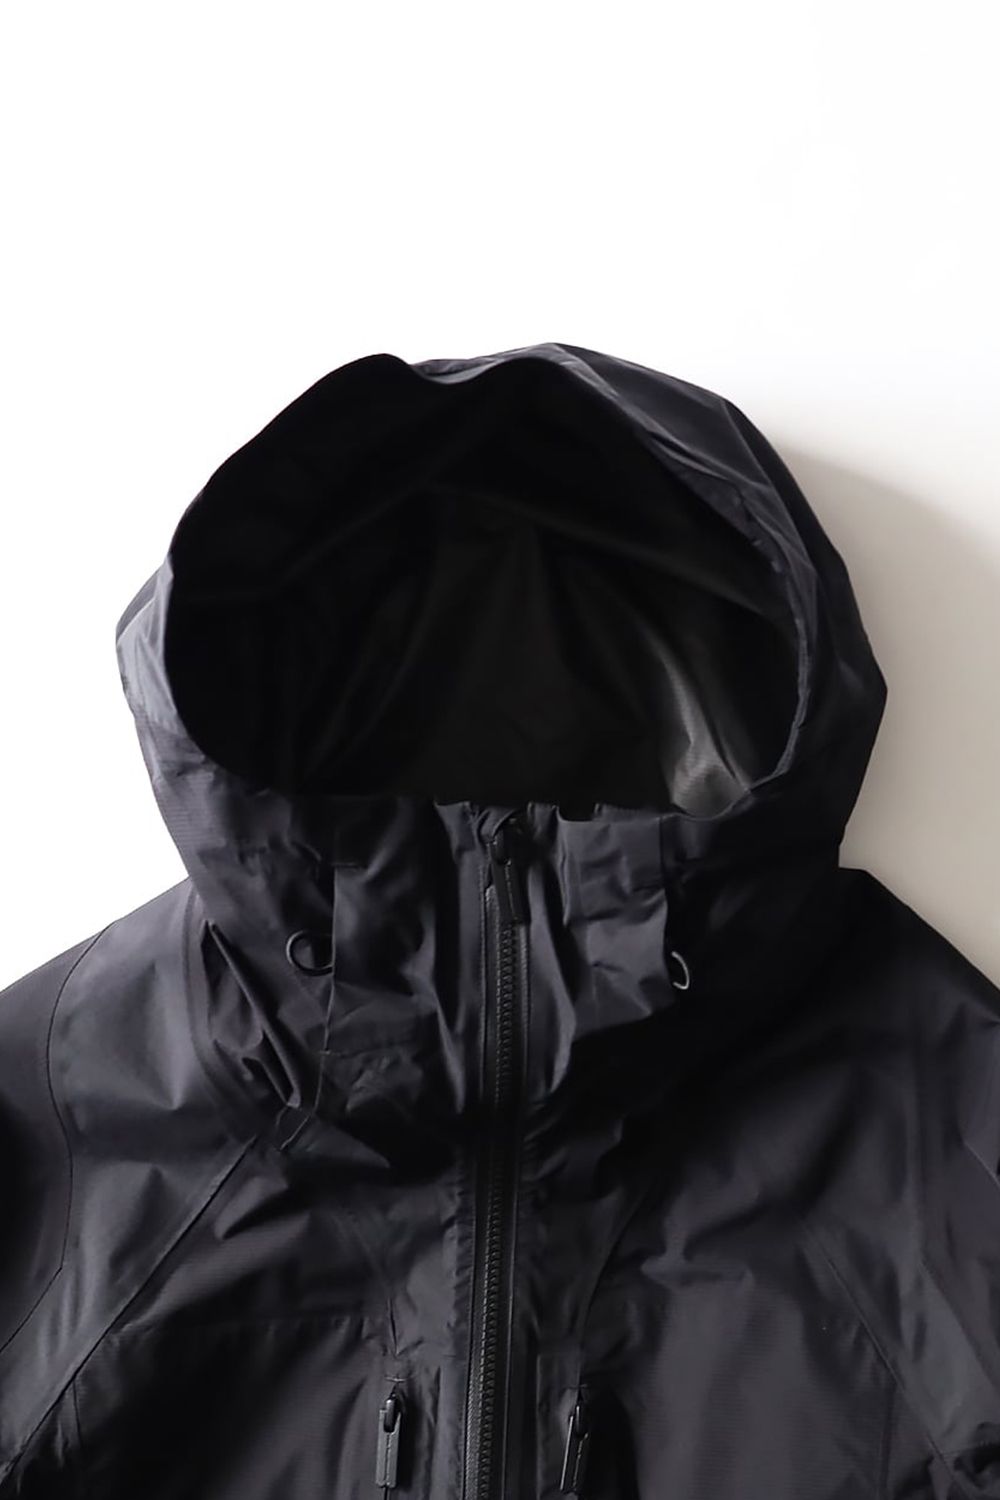 White Mountaineering - 【BLK】 GORE-TEX PACLITE PLUS HOODED JACKET